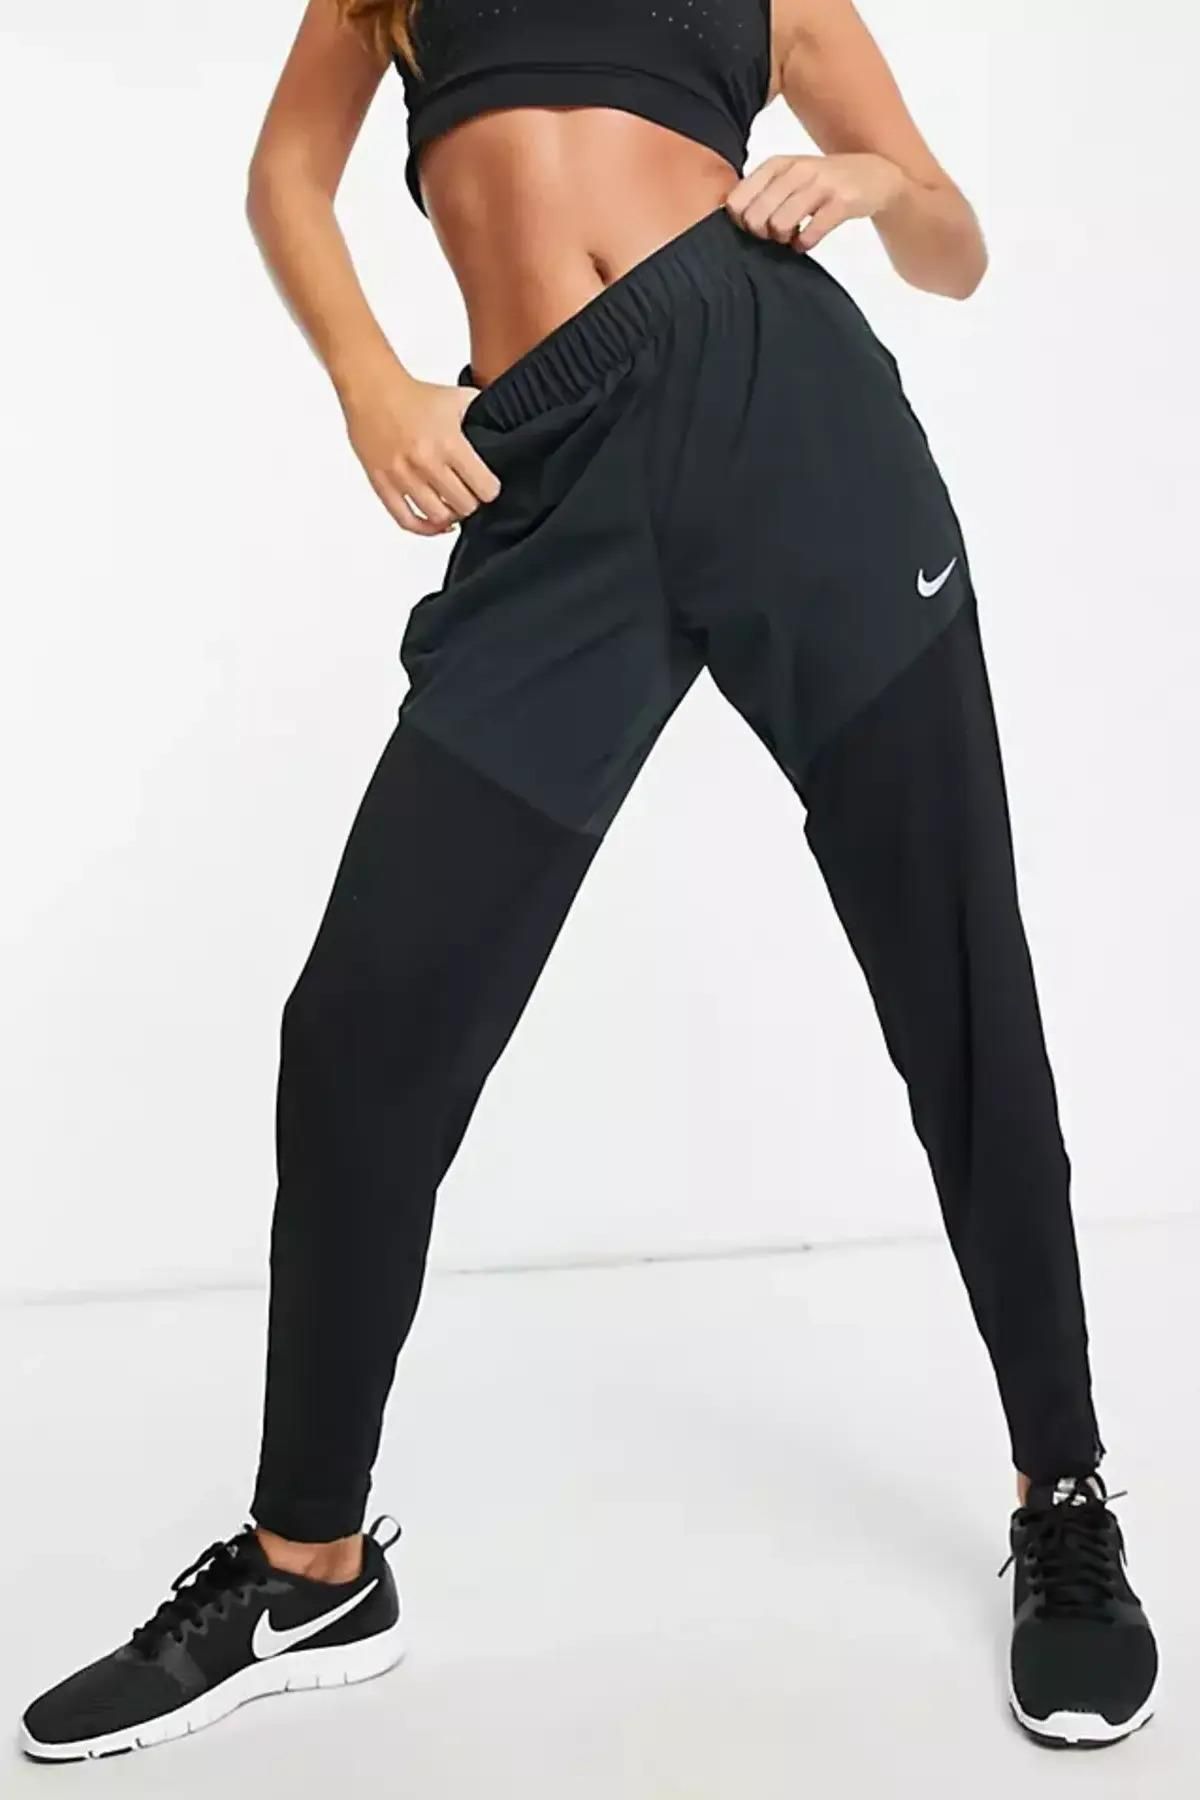 (WMNS) Nike Dri-FIT Essential Quick-dry Tight Running Sports Fitness Pants  Black DH6980-010